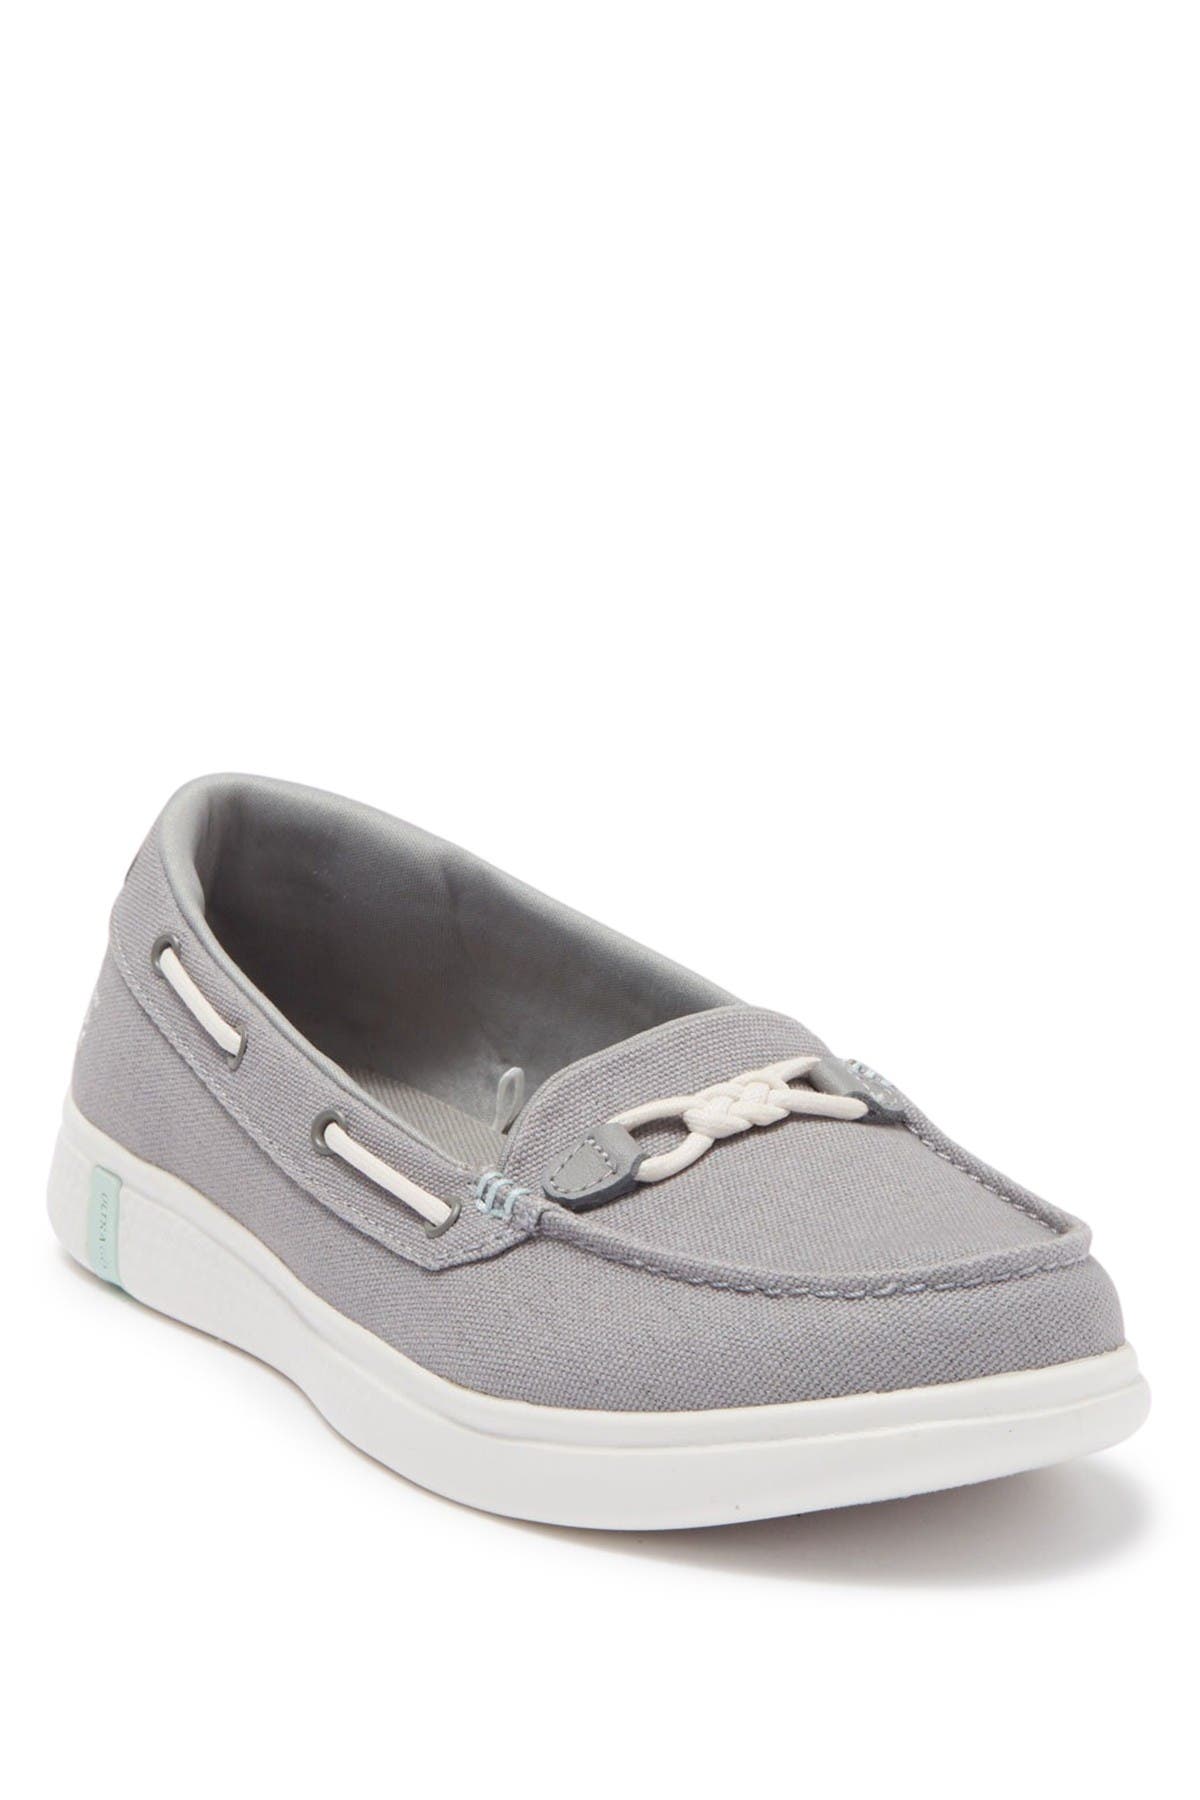 skechers white boat shoes